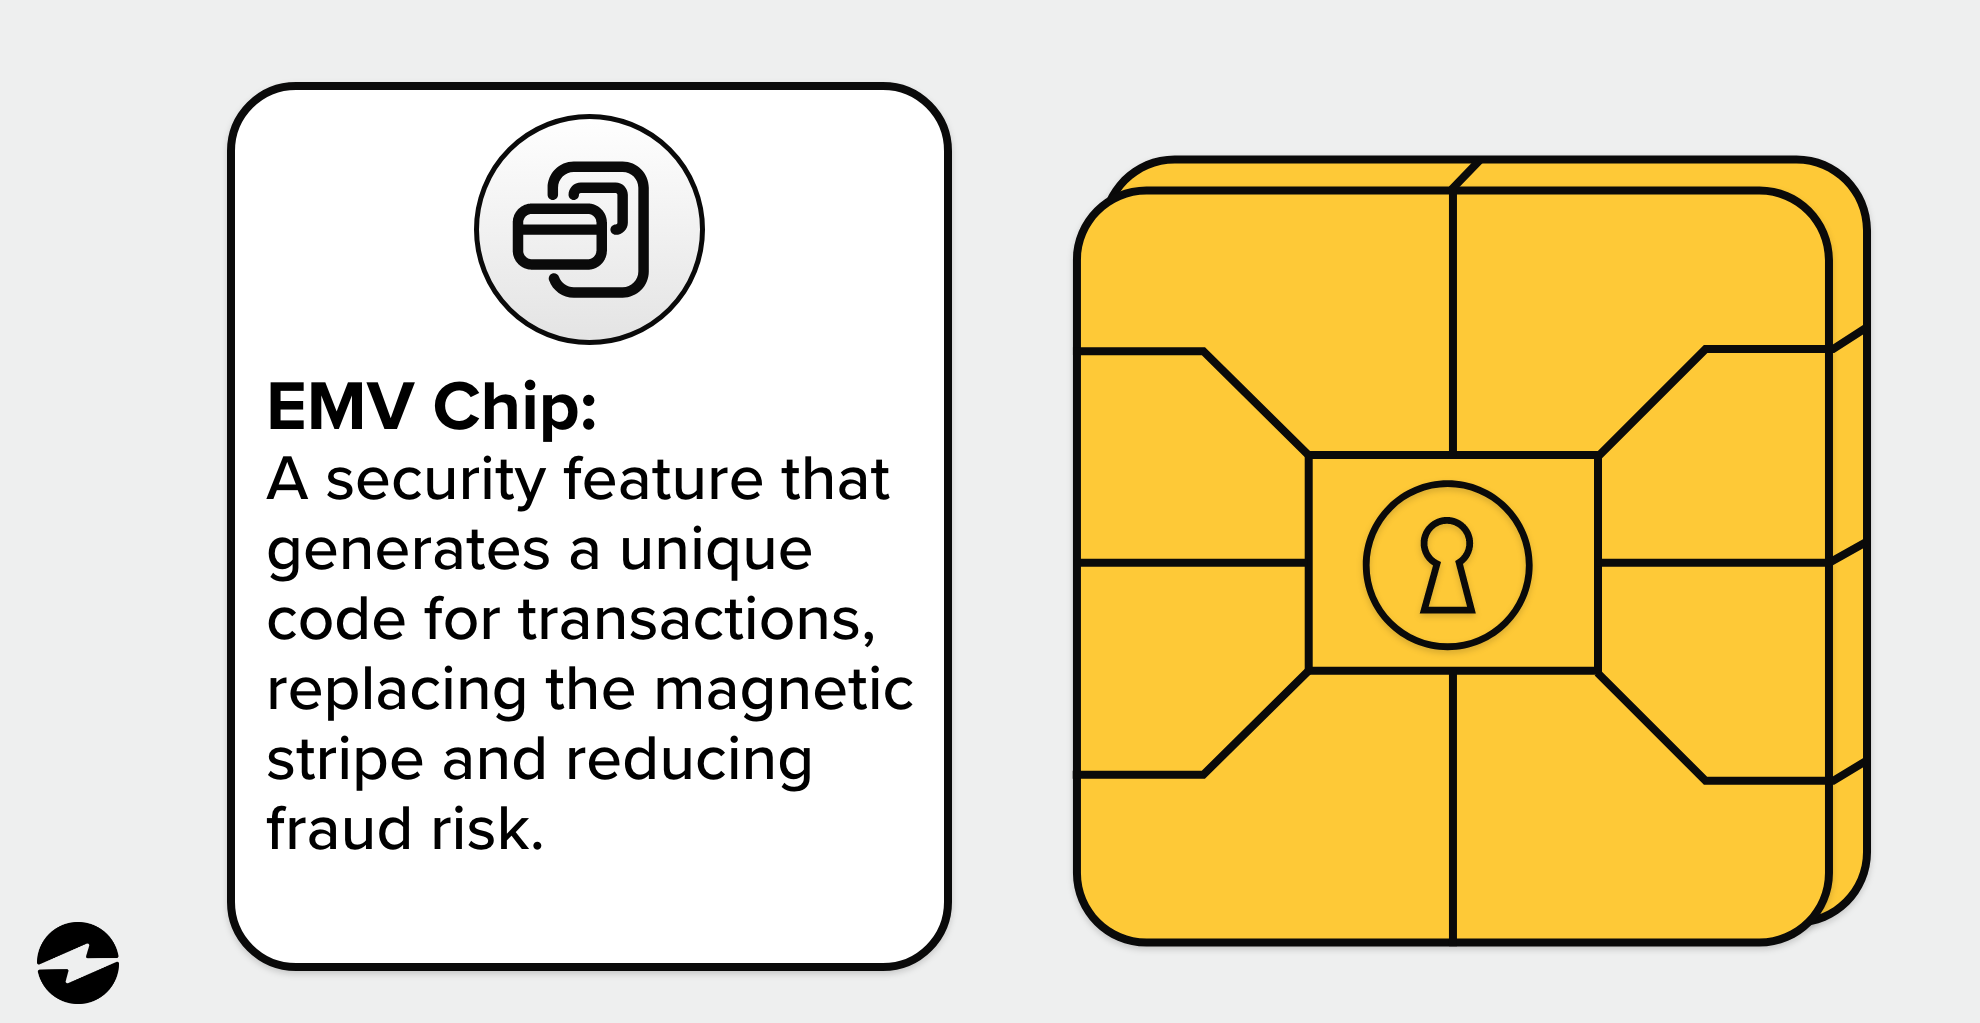 What is an EMV Chip?